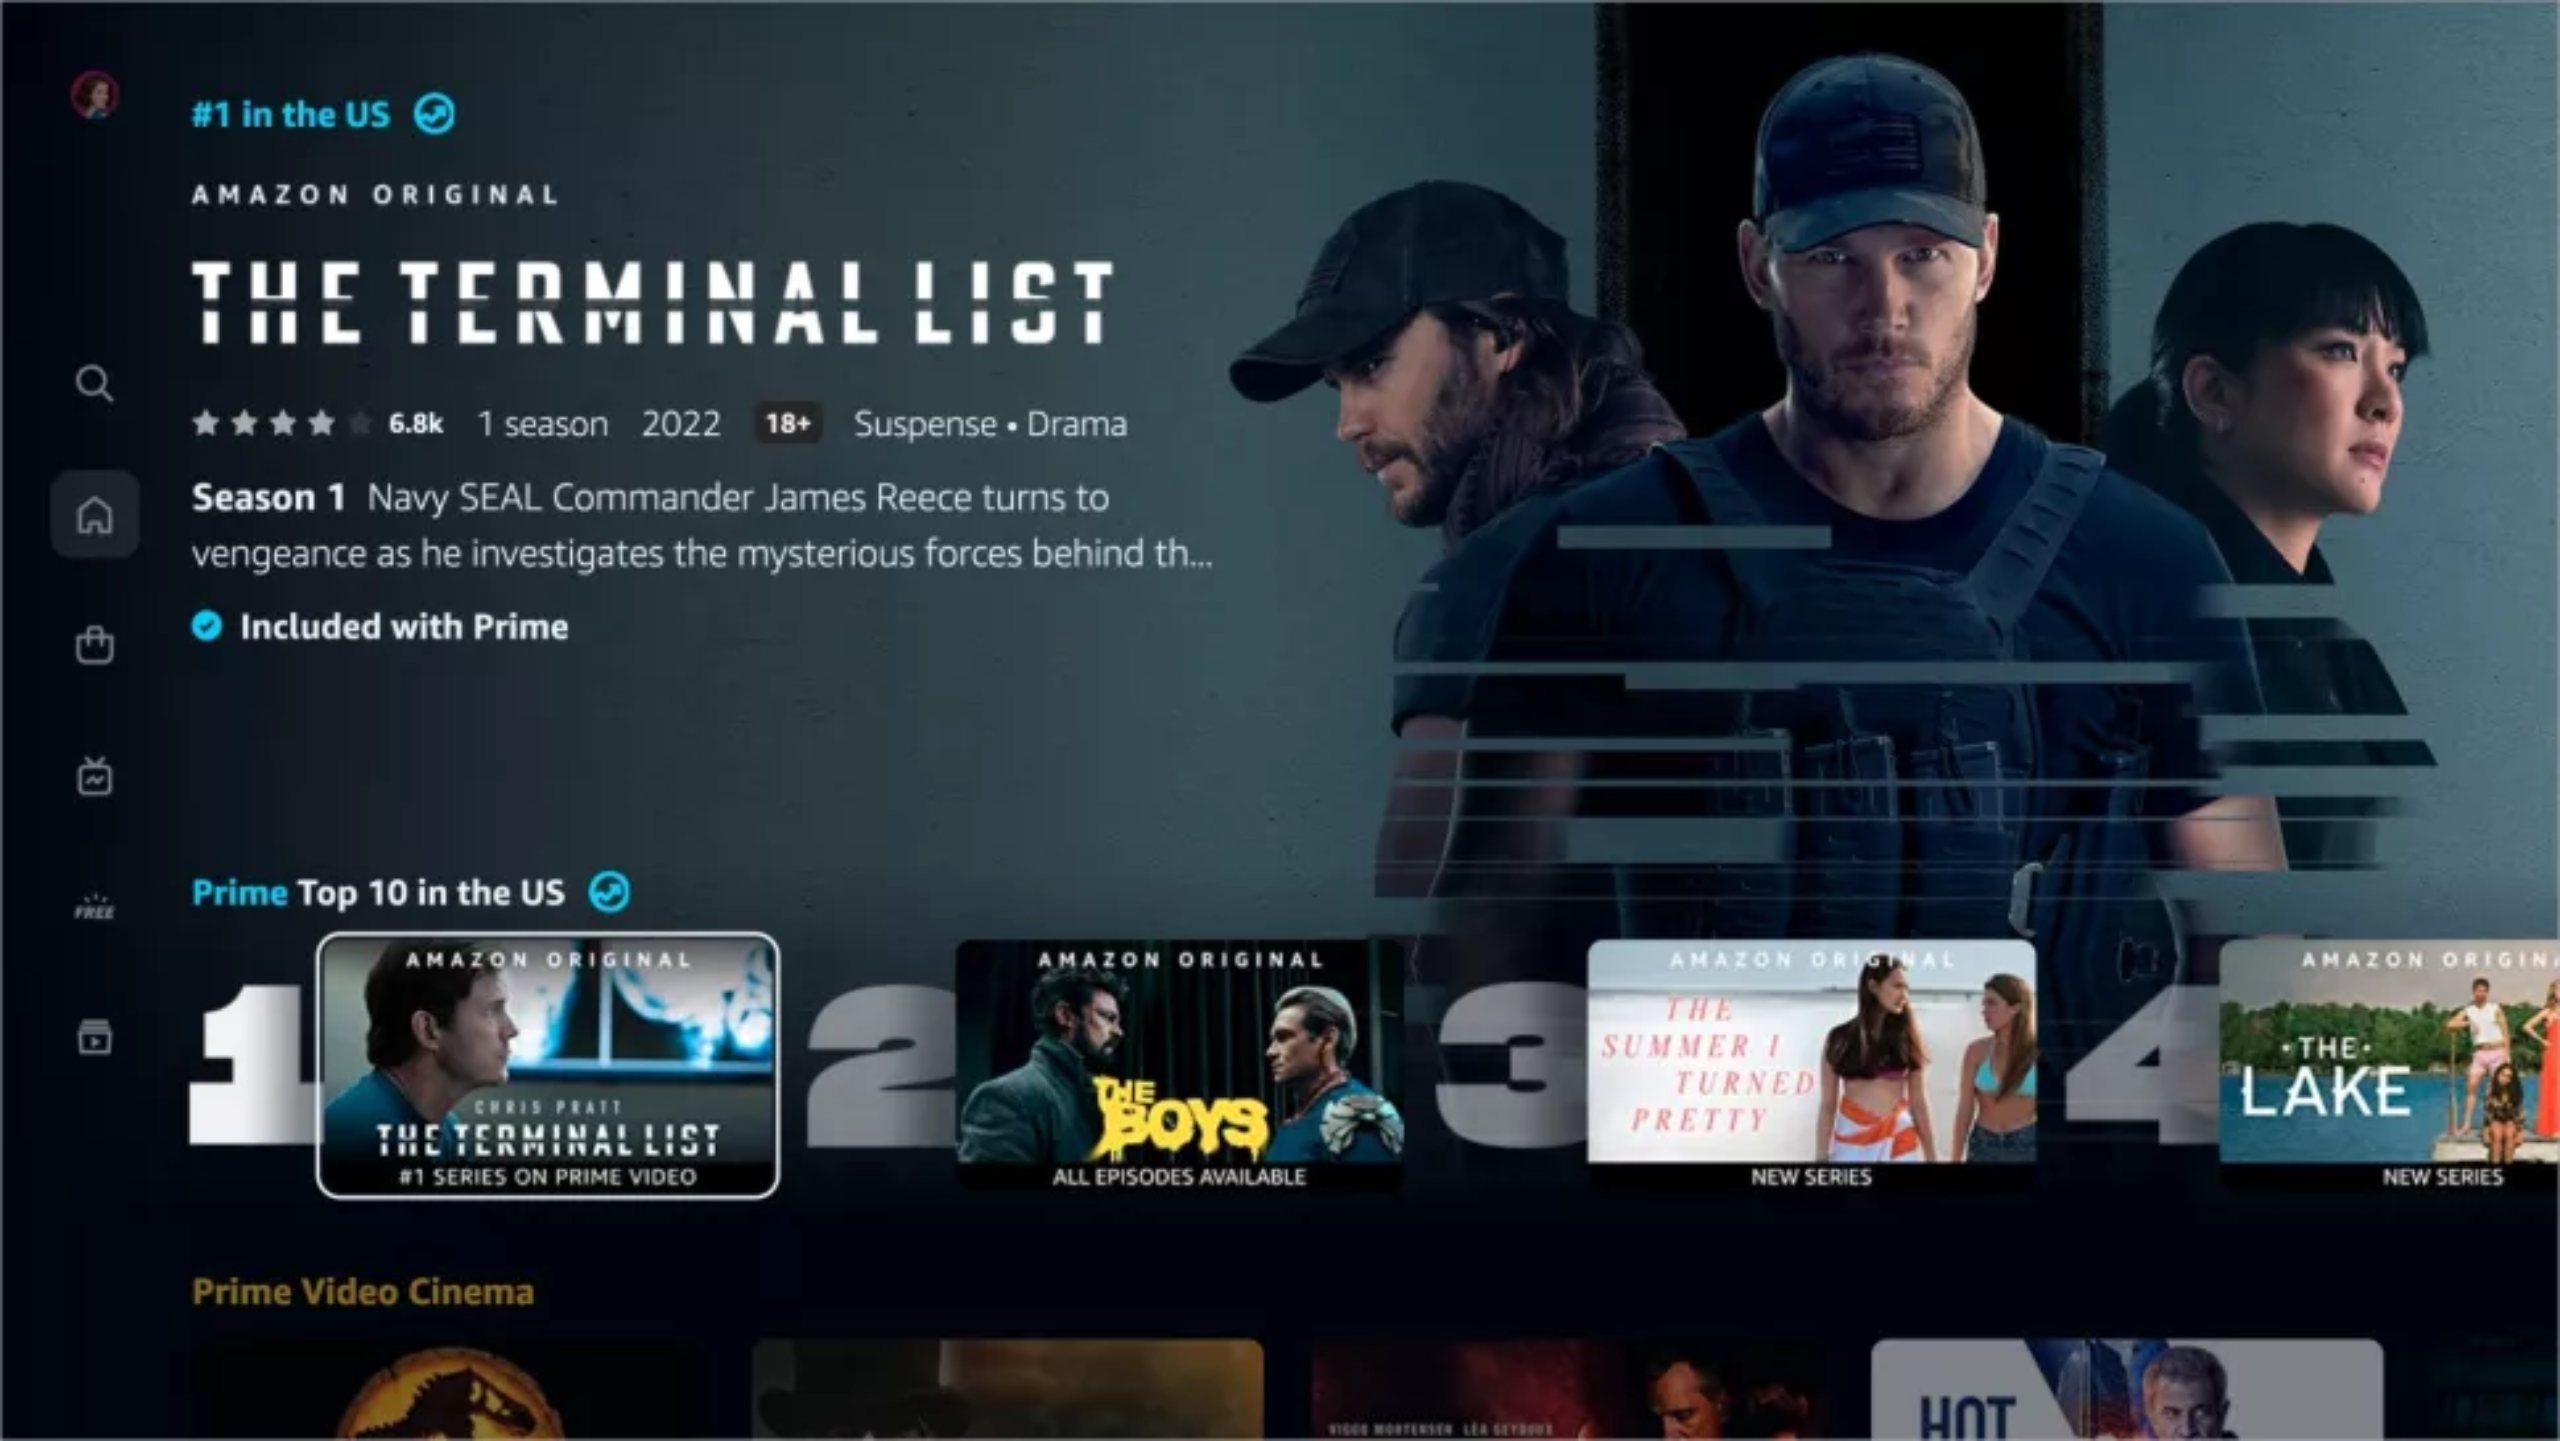 Amazon finally redesigns Prime Video’s interface, includes new menu options, lists and more